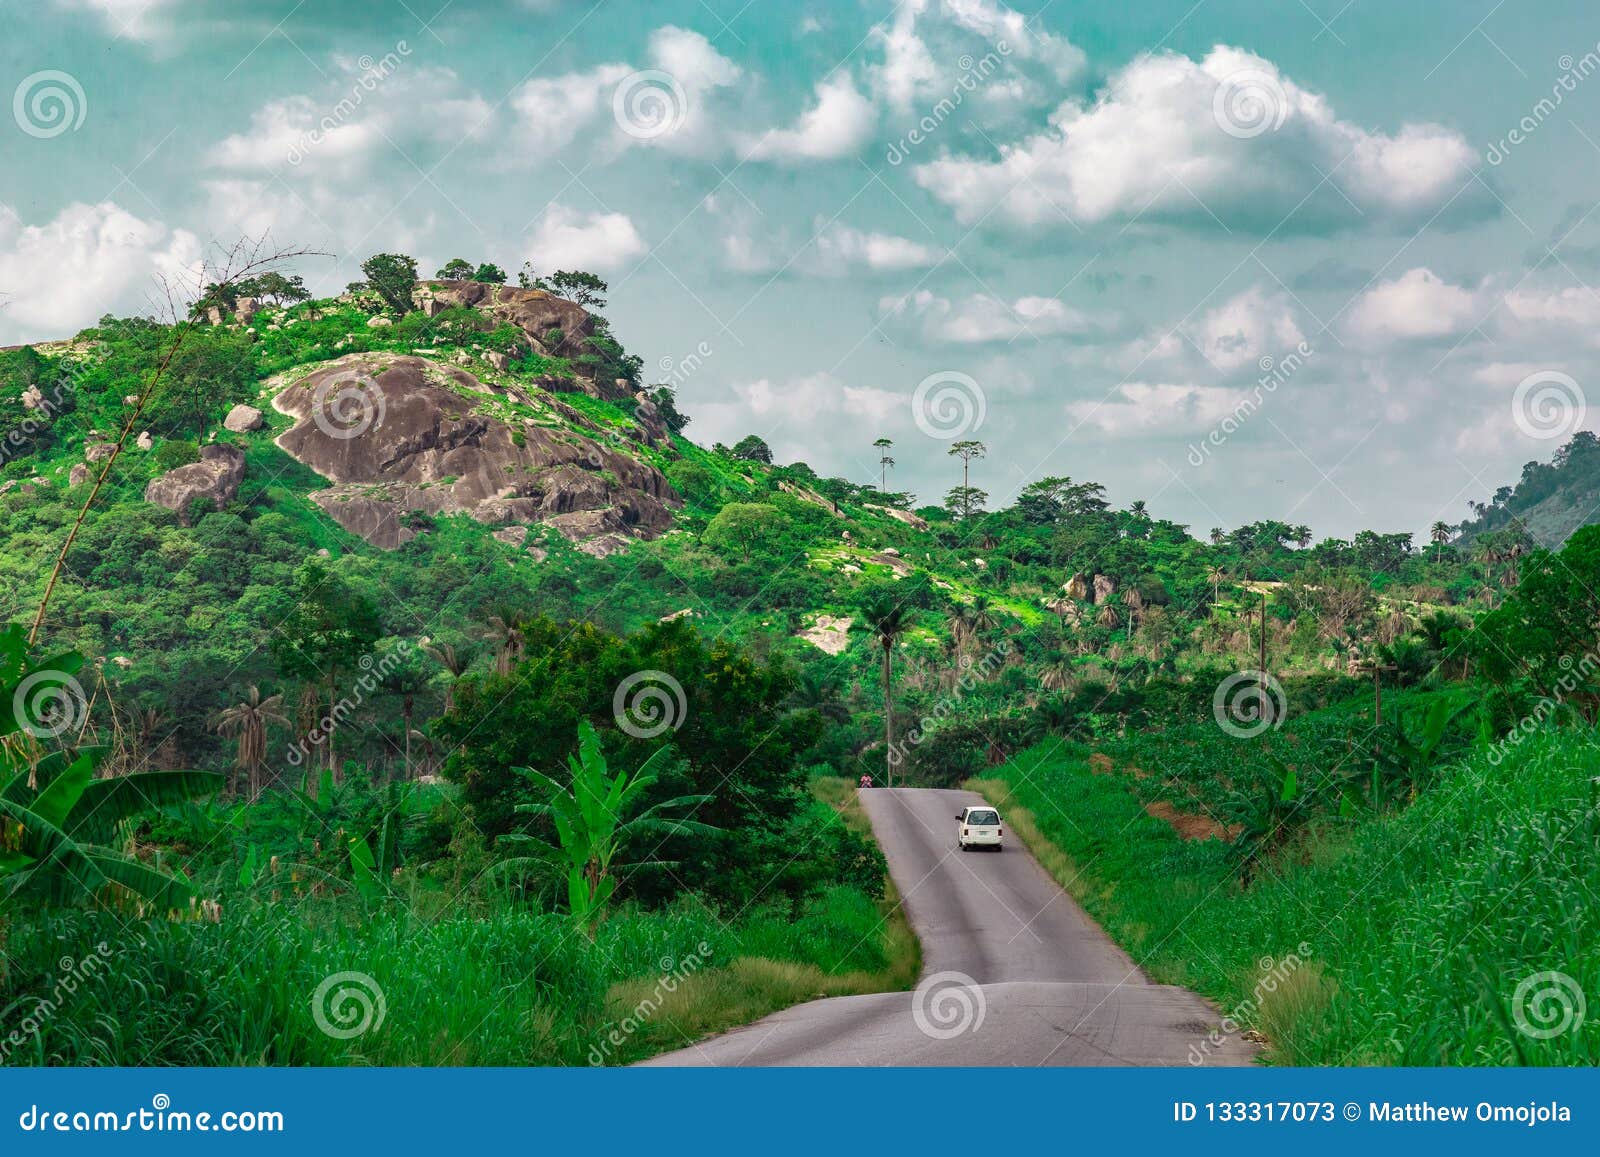 automobile on a longer section of a disappearing rural road ekiti state nigeria. disappearing road 